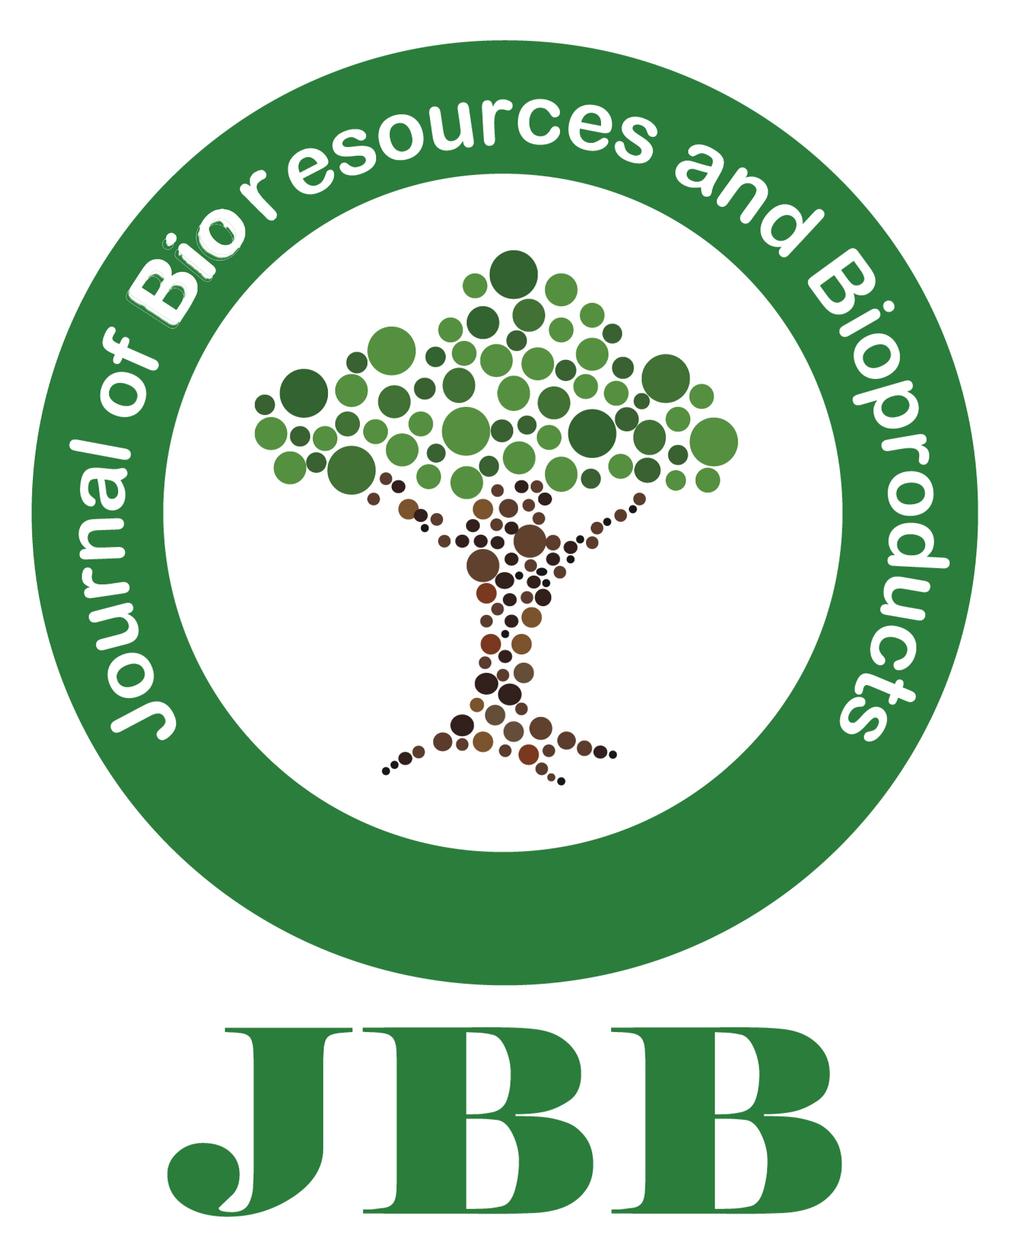 Journal of Bioresources and Bioproducts.